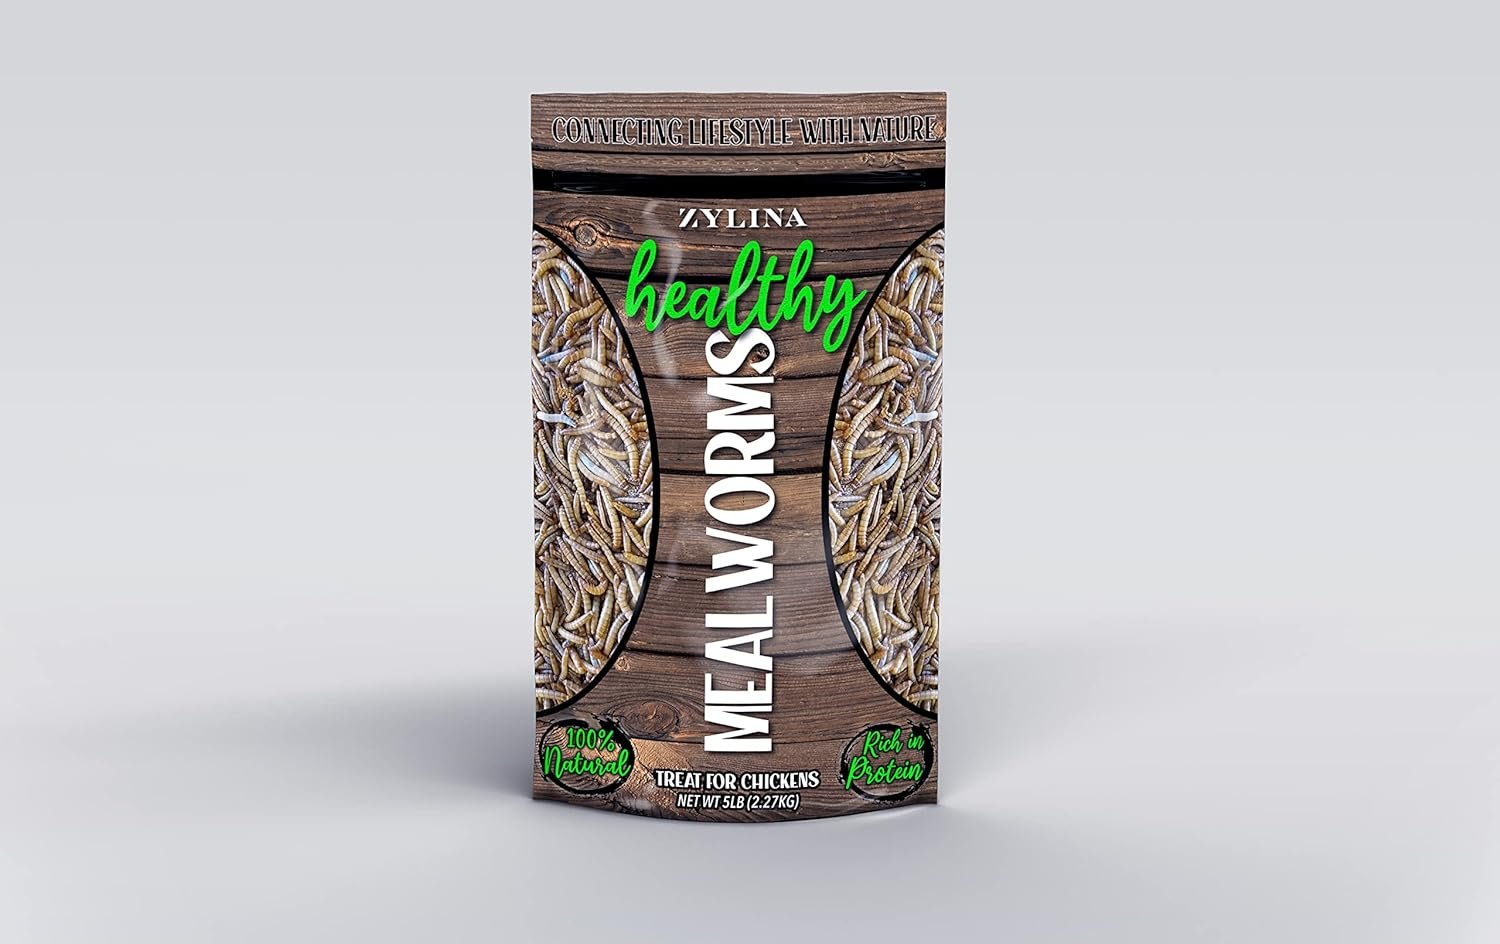 Zylina Healthy Mealworms for Chickens, 5lb Bag, Treats for Chickens, Hen Treats, Protein Source, All Natural